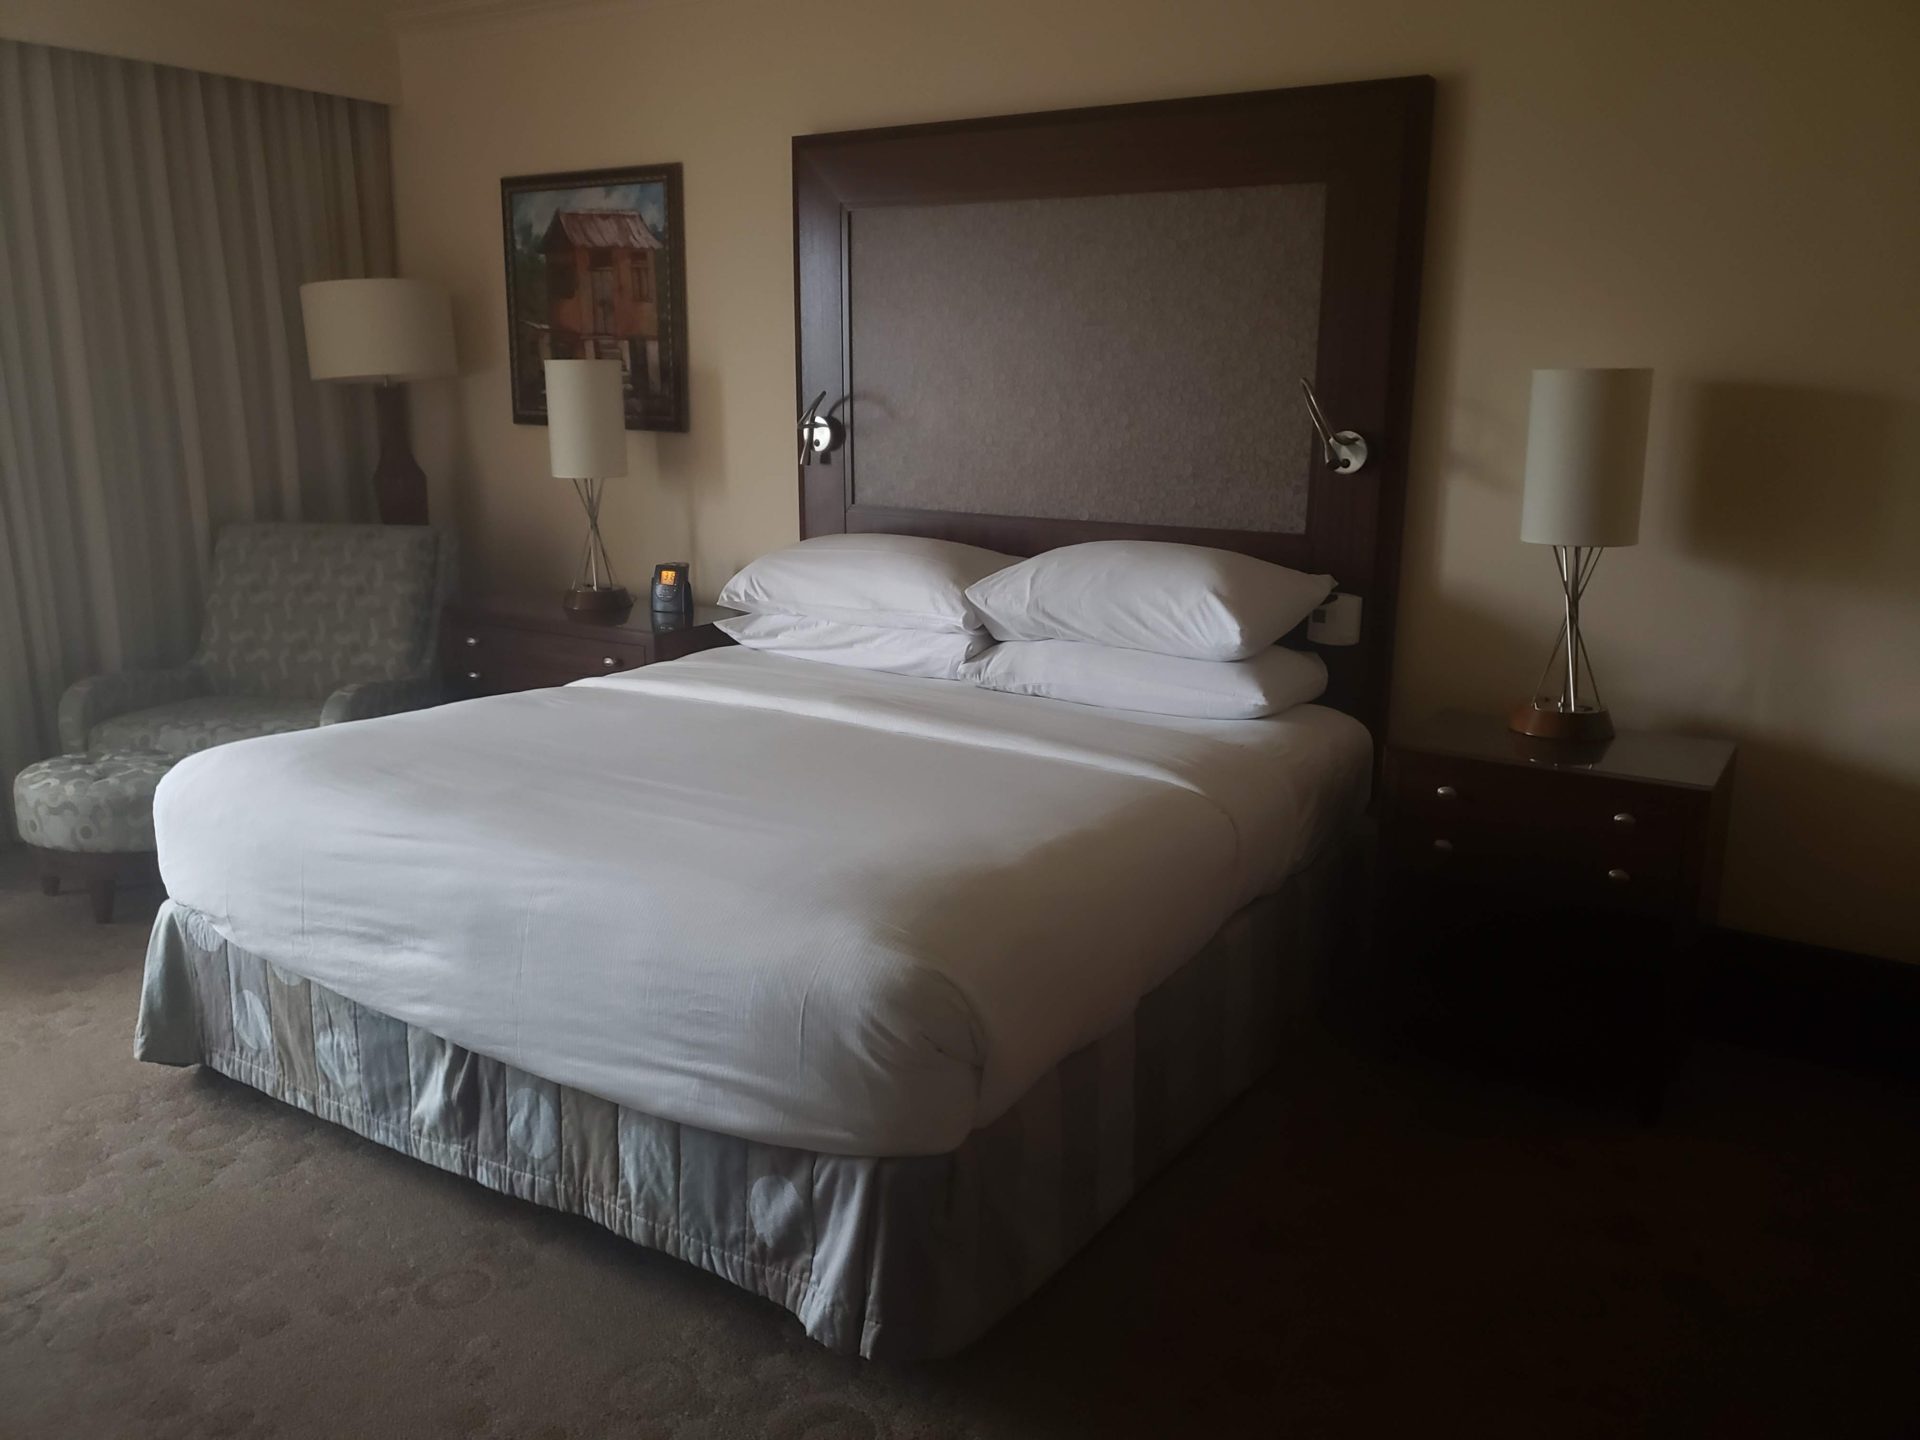 a bed with white sheets and a wood headboard in a hotel room